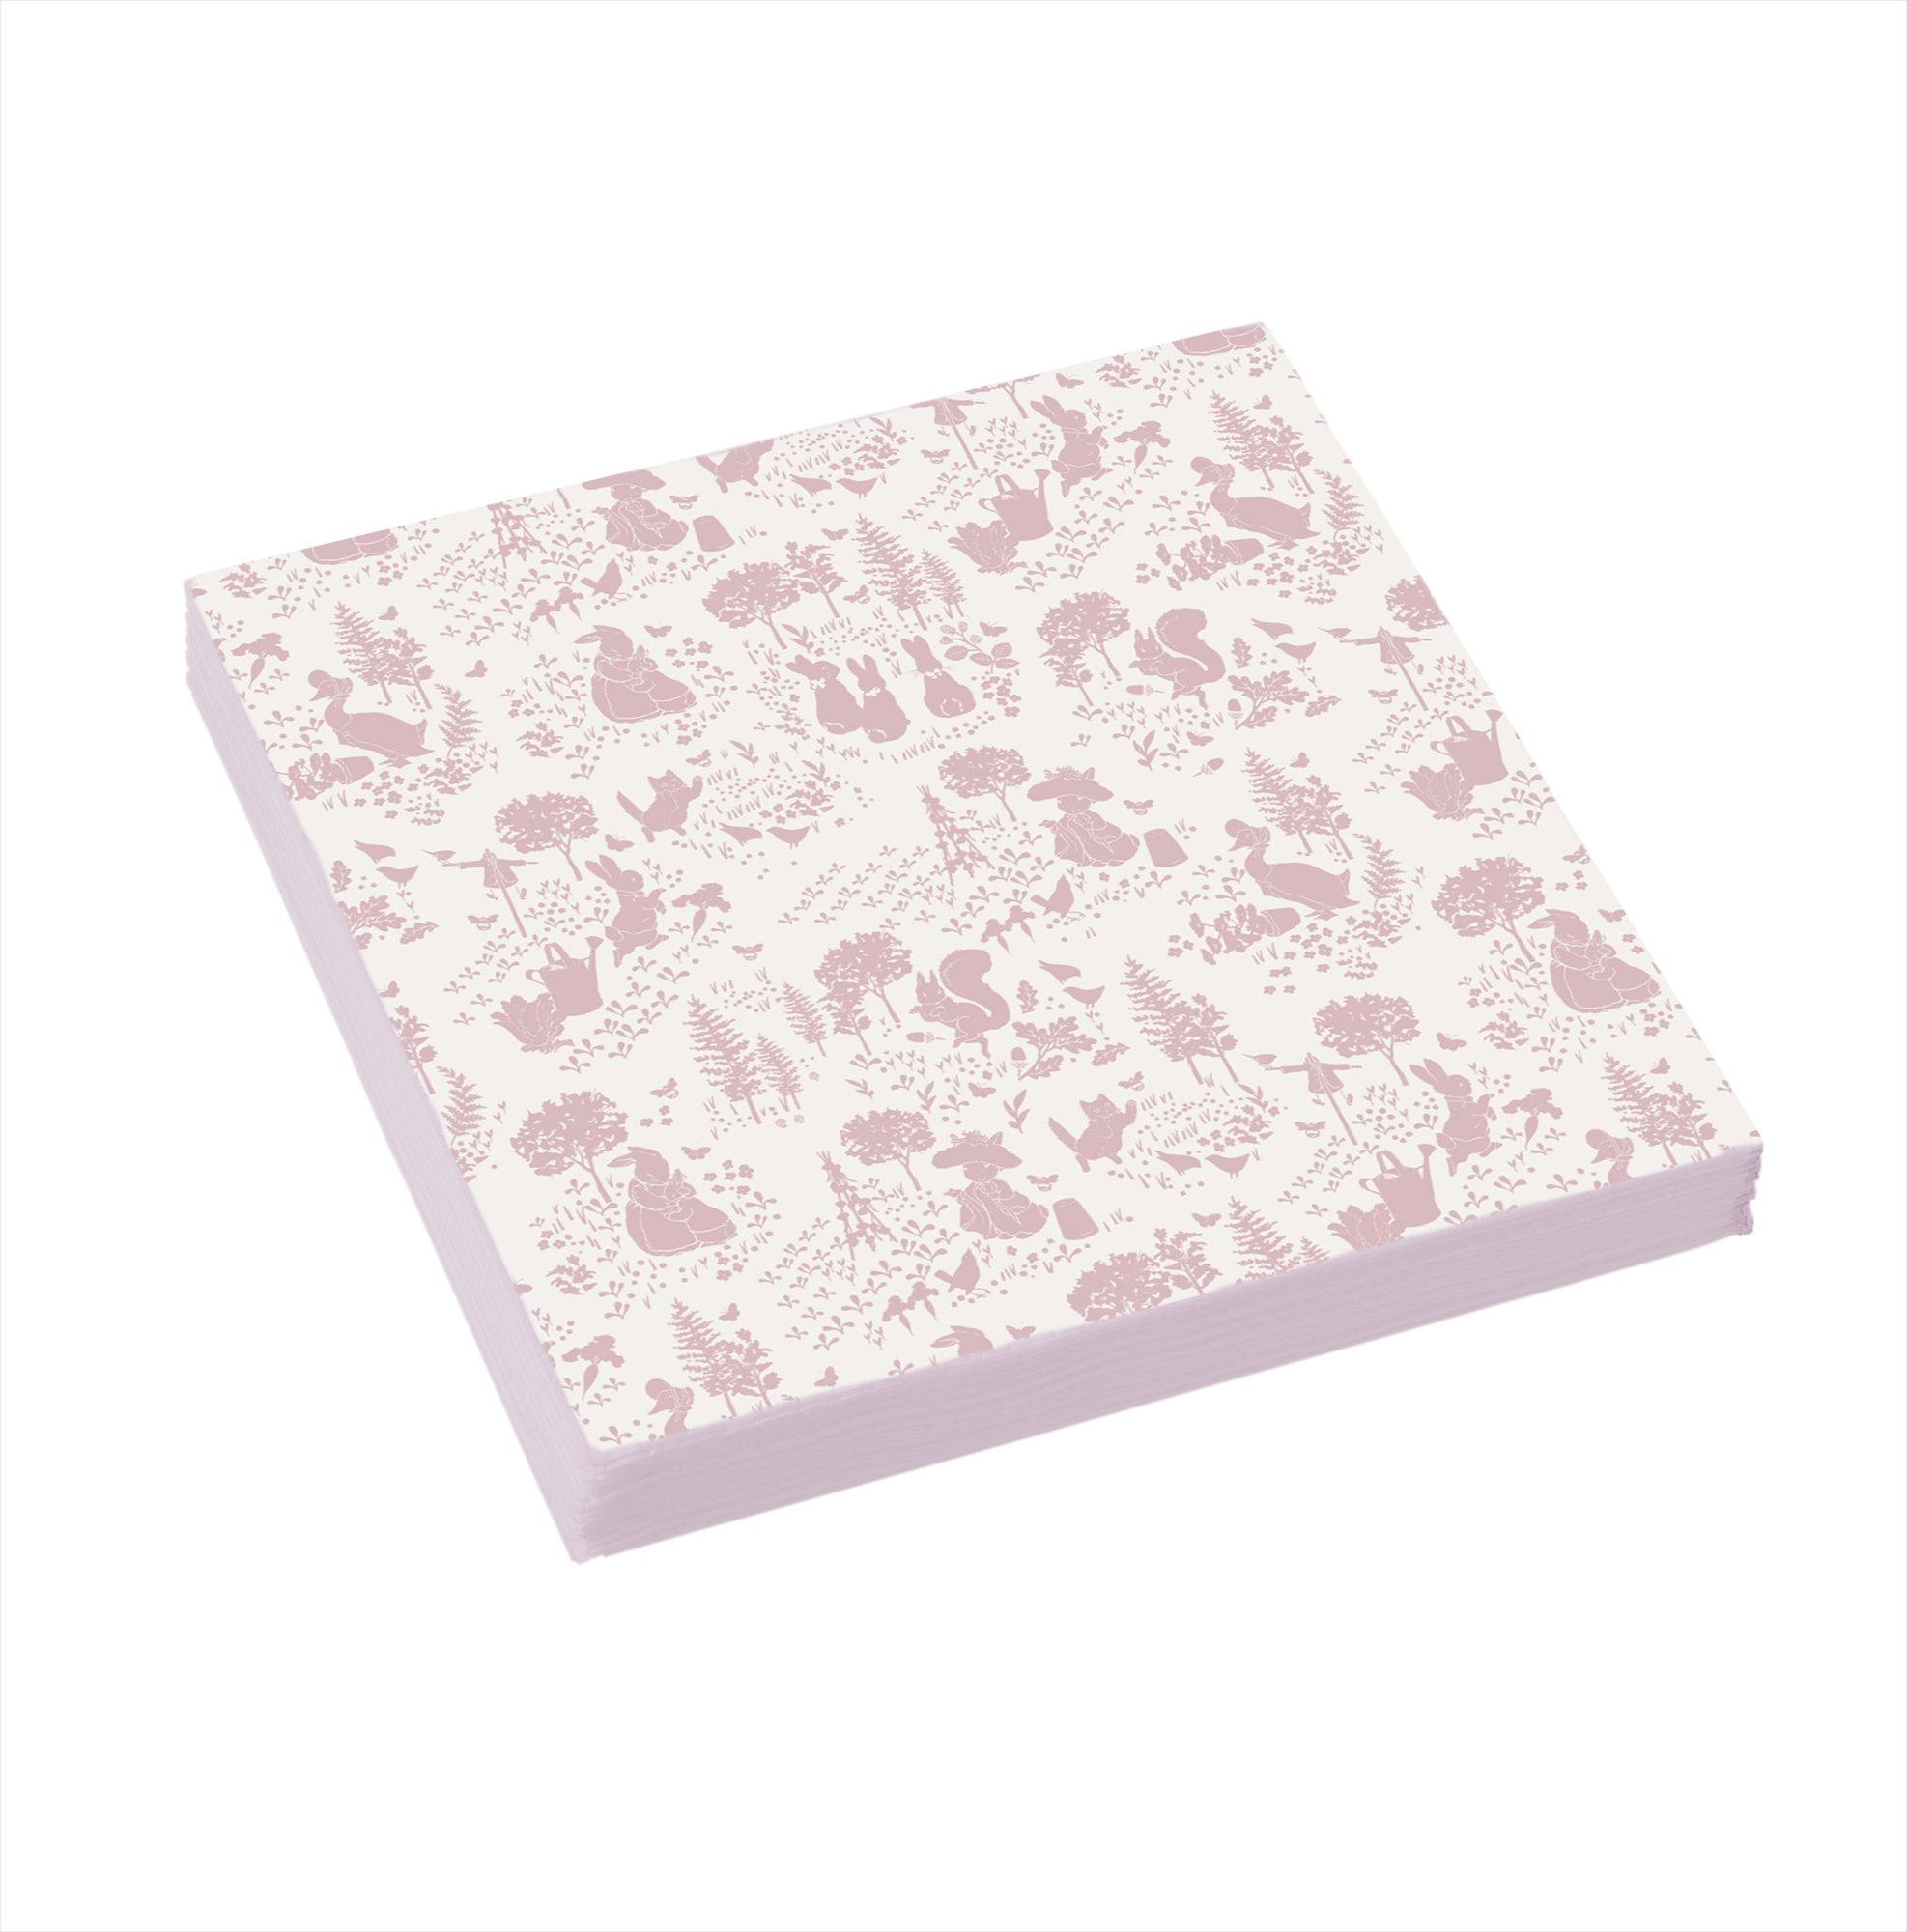 PETER RABBIT CLASSIC PINK 3PLY PAPER NAPKINS